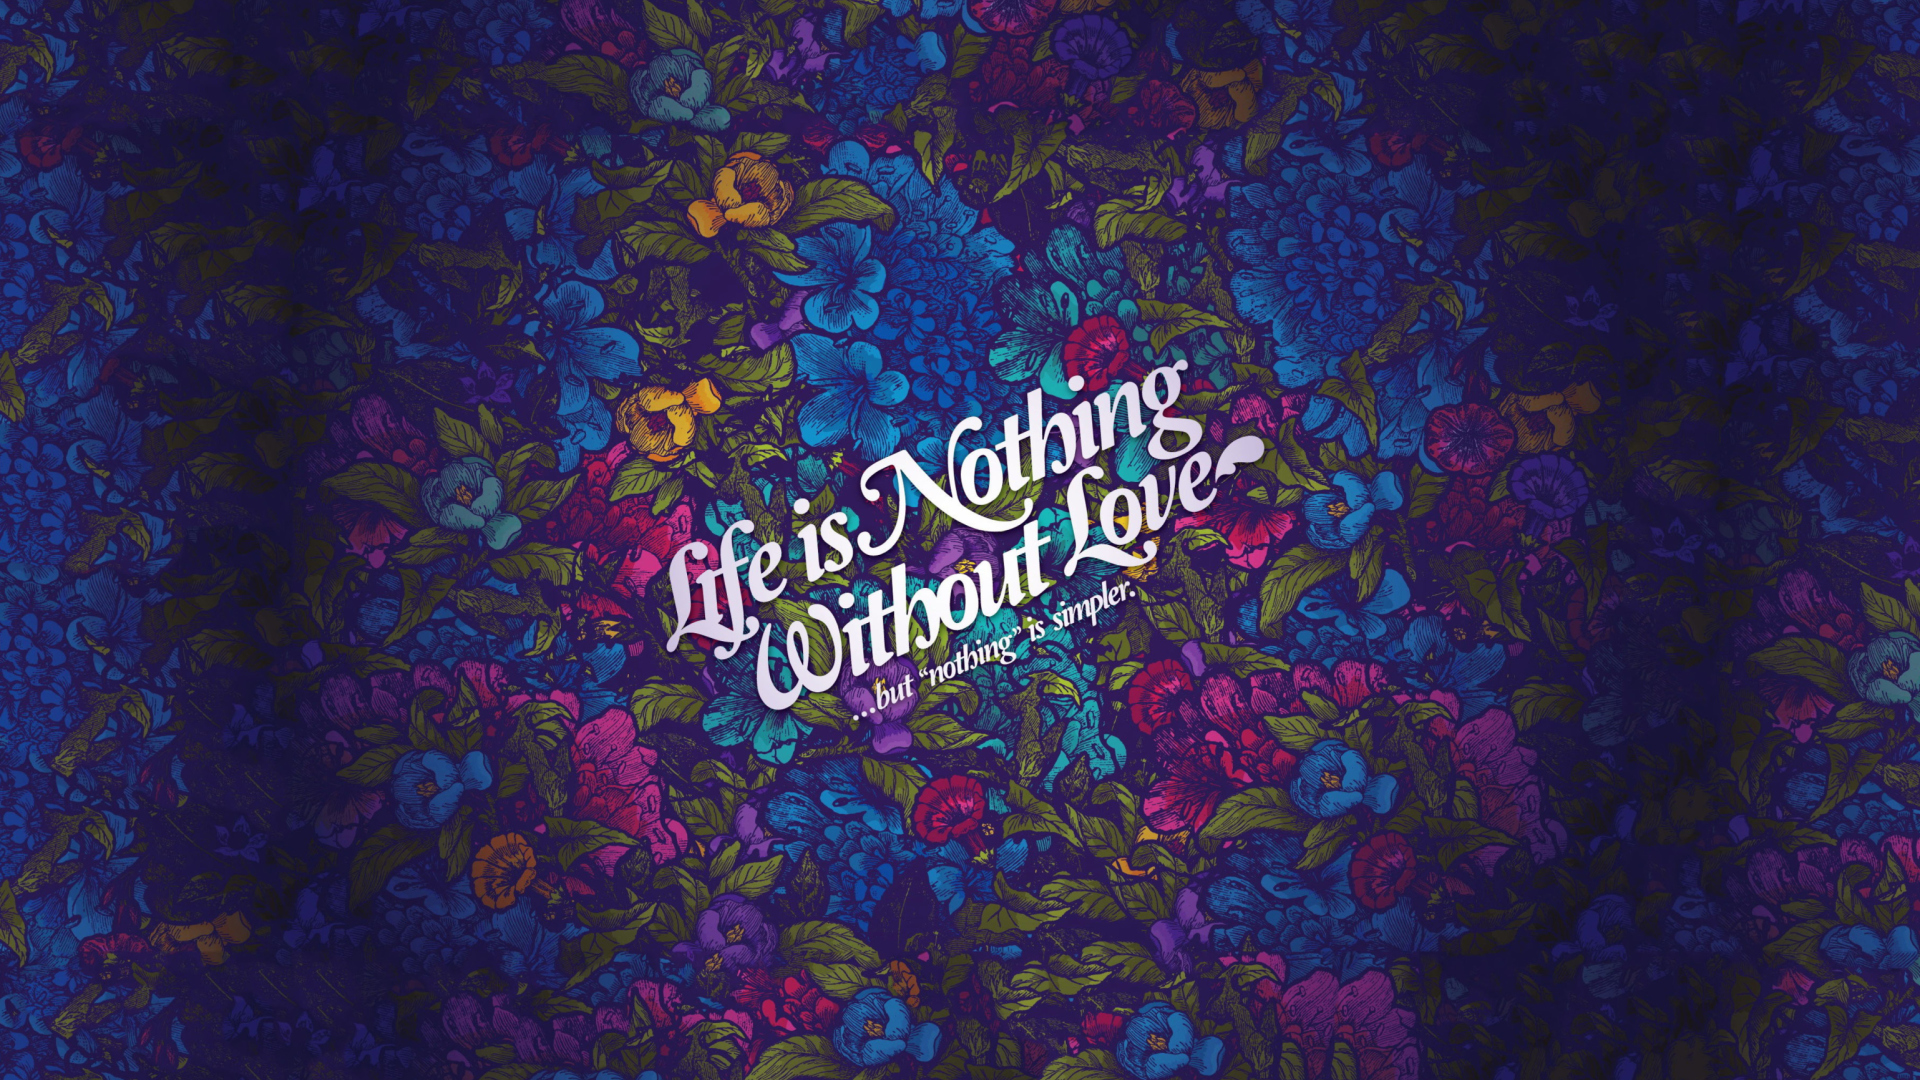 Das Life Is Nothing Without Love Wallpaper 1920x1080